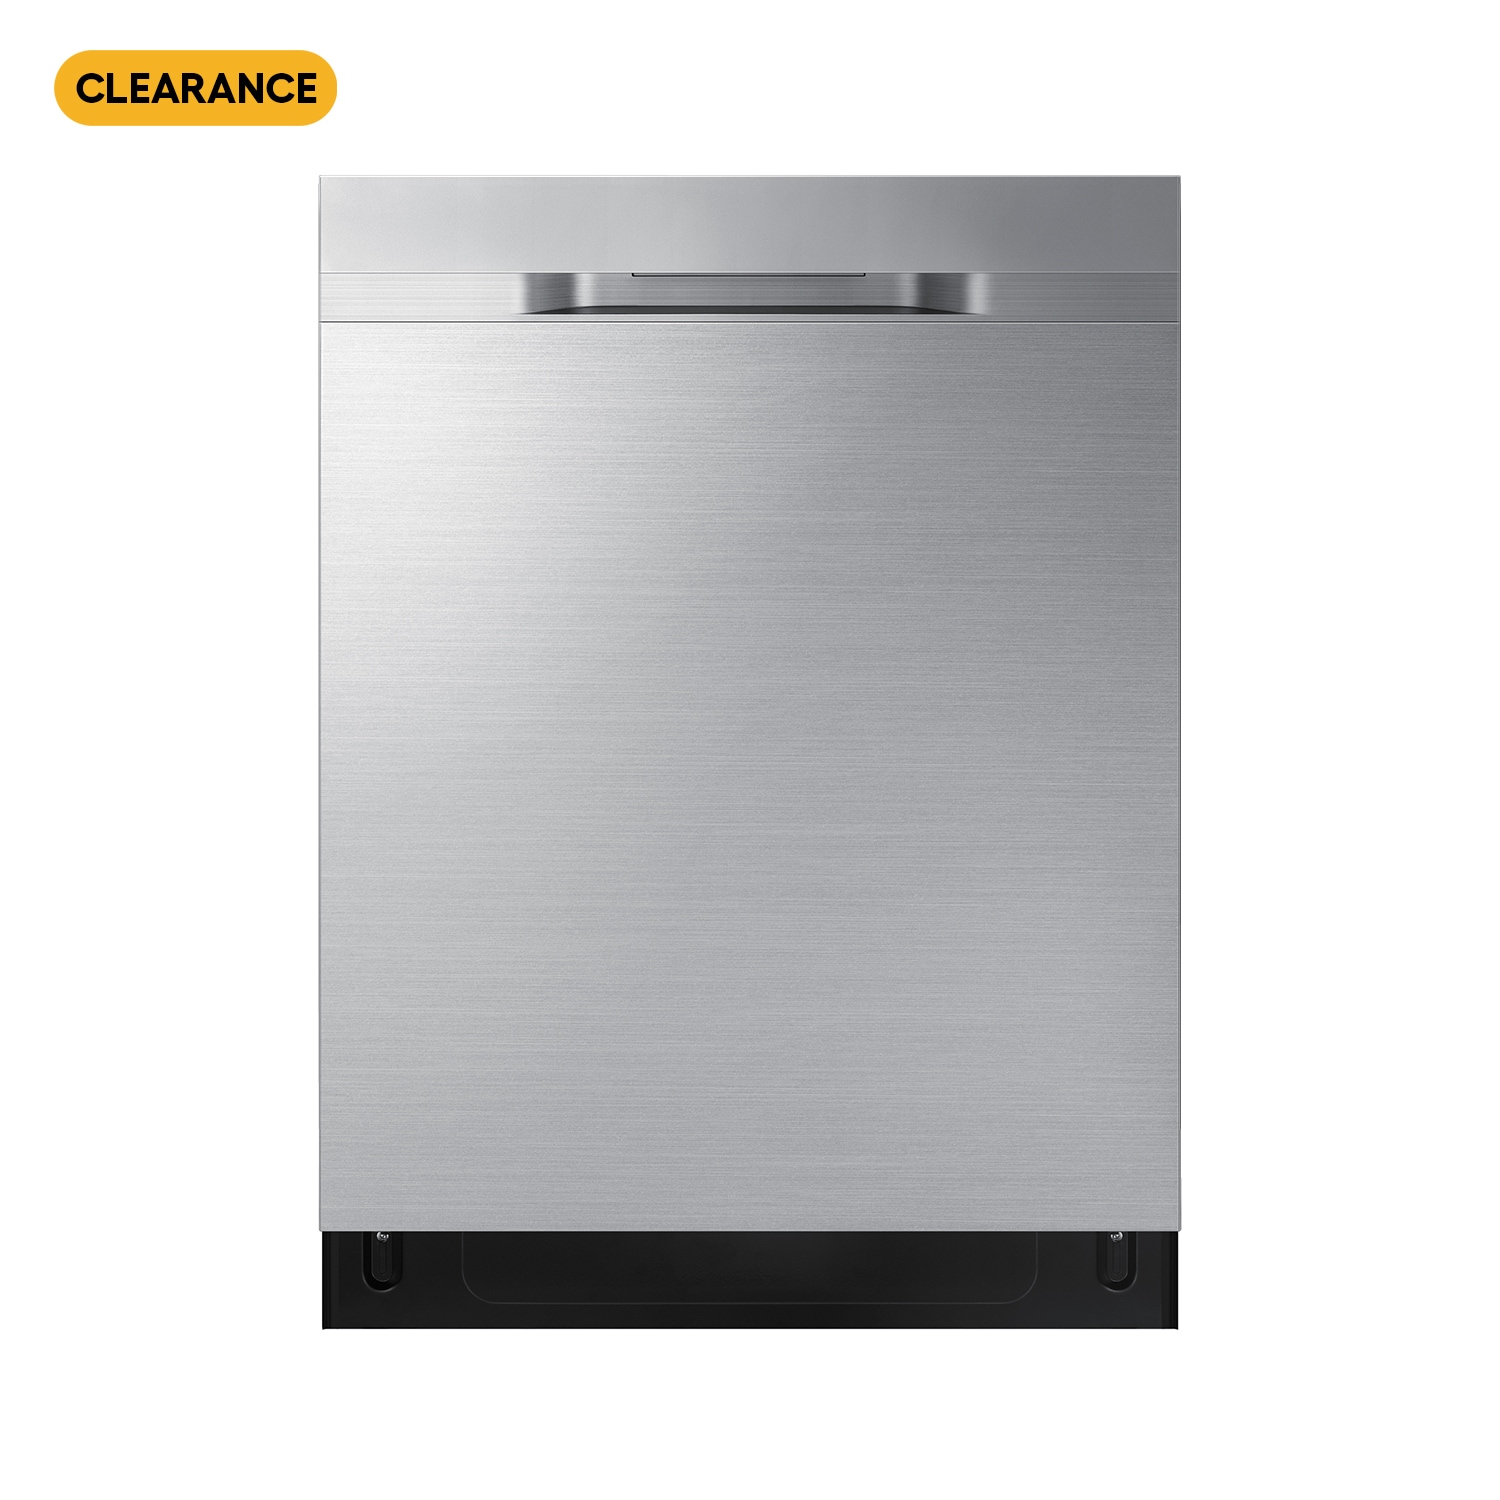 Looking to avoid] Large stainless steel oven, dishwasher, freezer